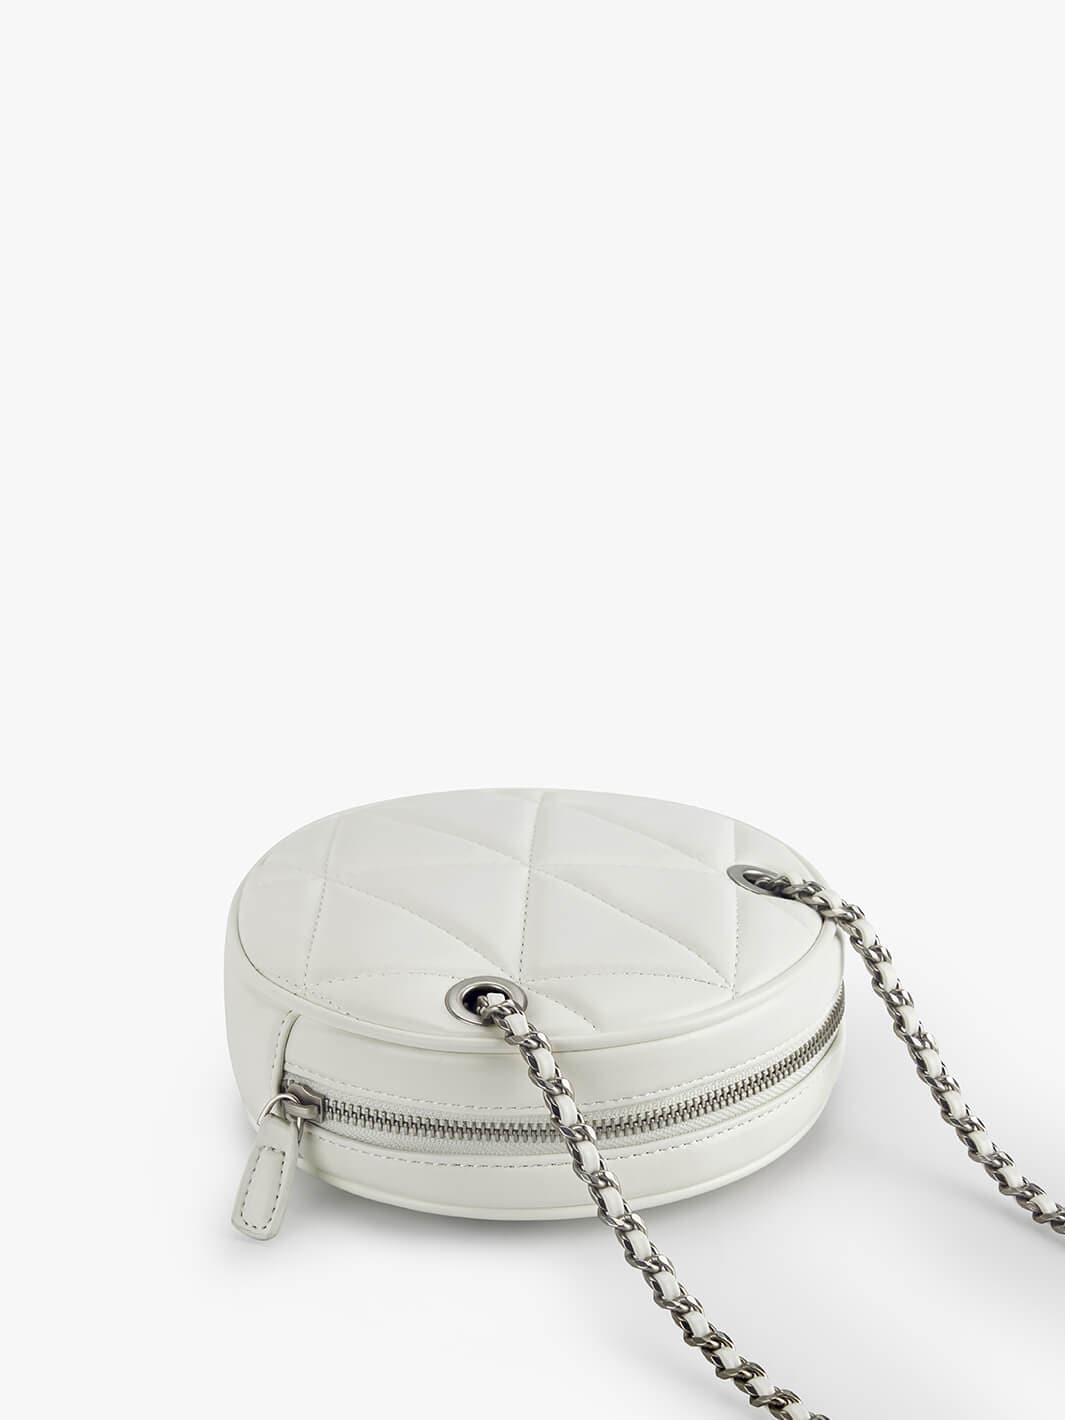 Melody quilted circle bag